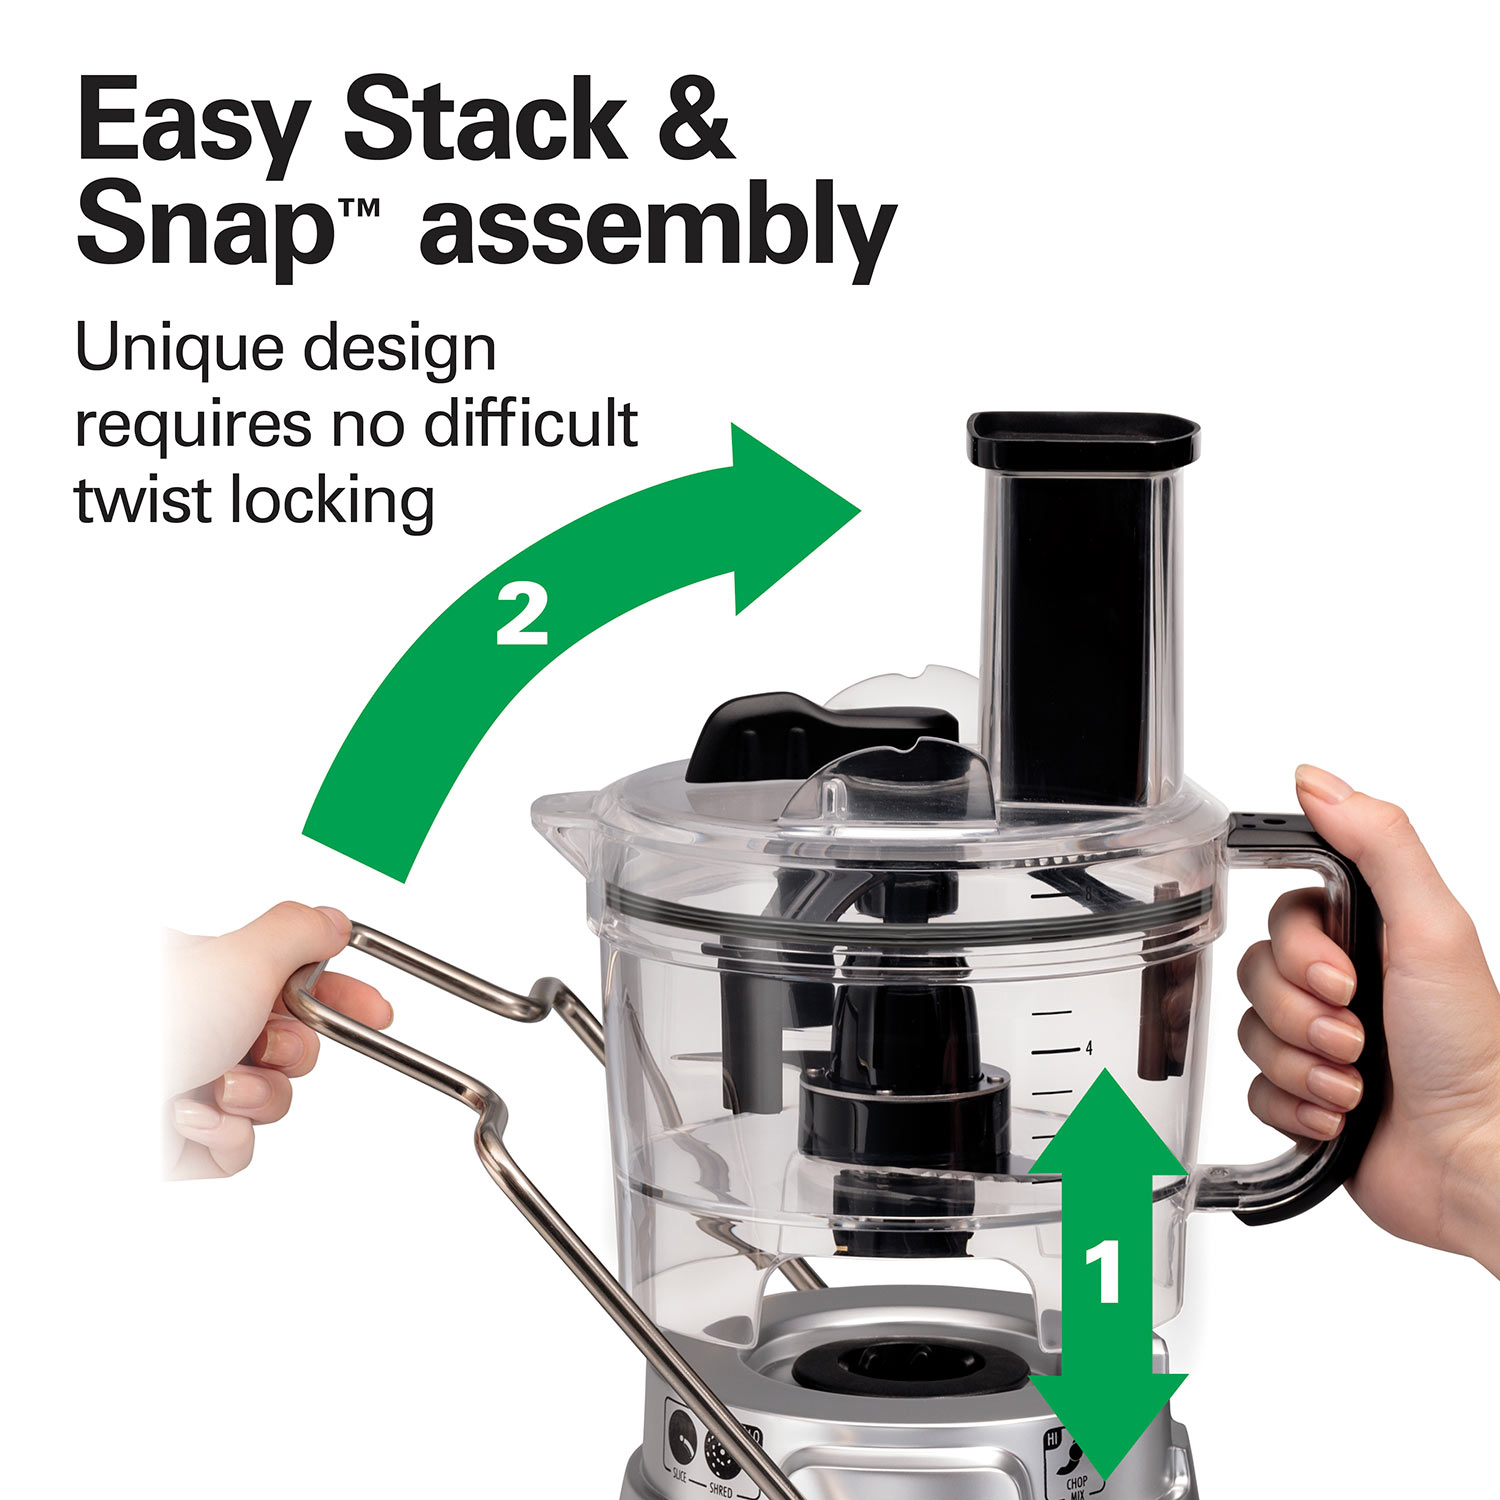 Hamilton Beach Stack & Snap Food Processor 8-Cup with Built-In Bowl Scraper - Silver